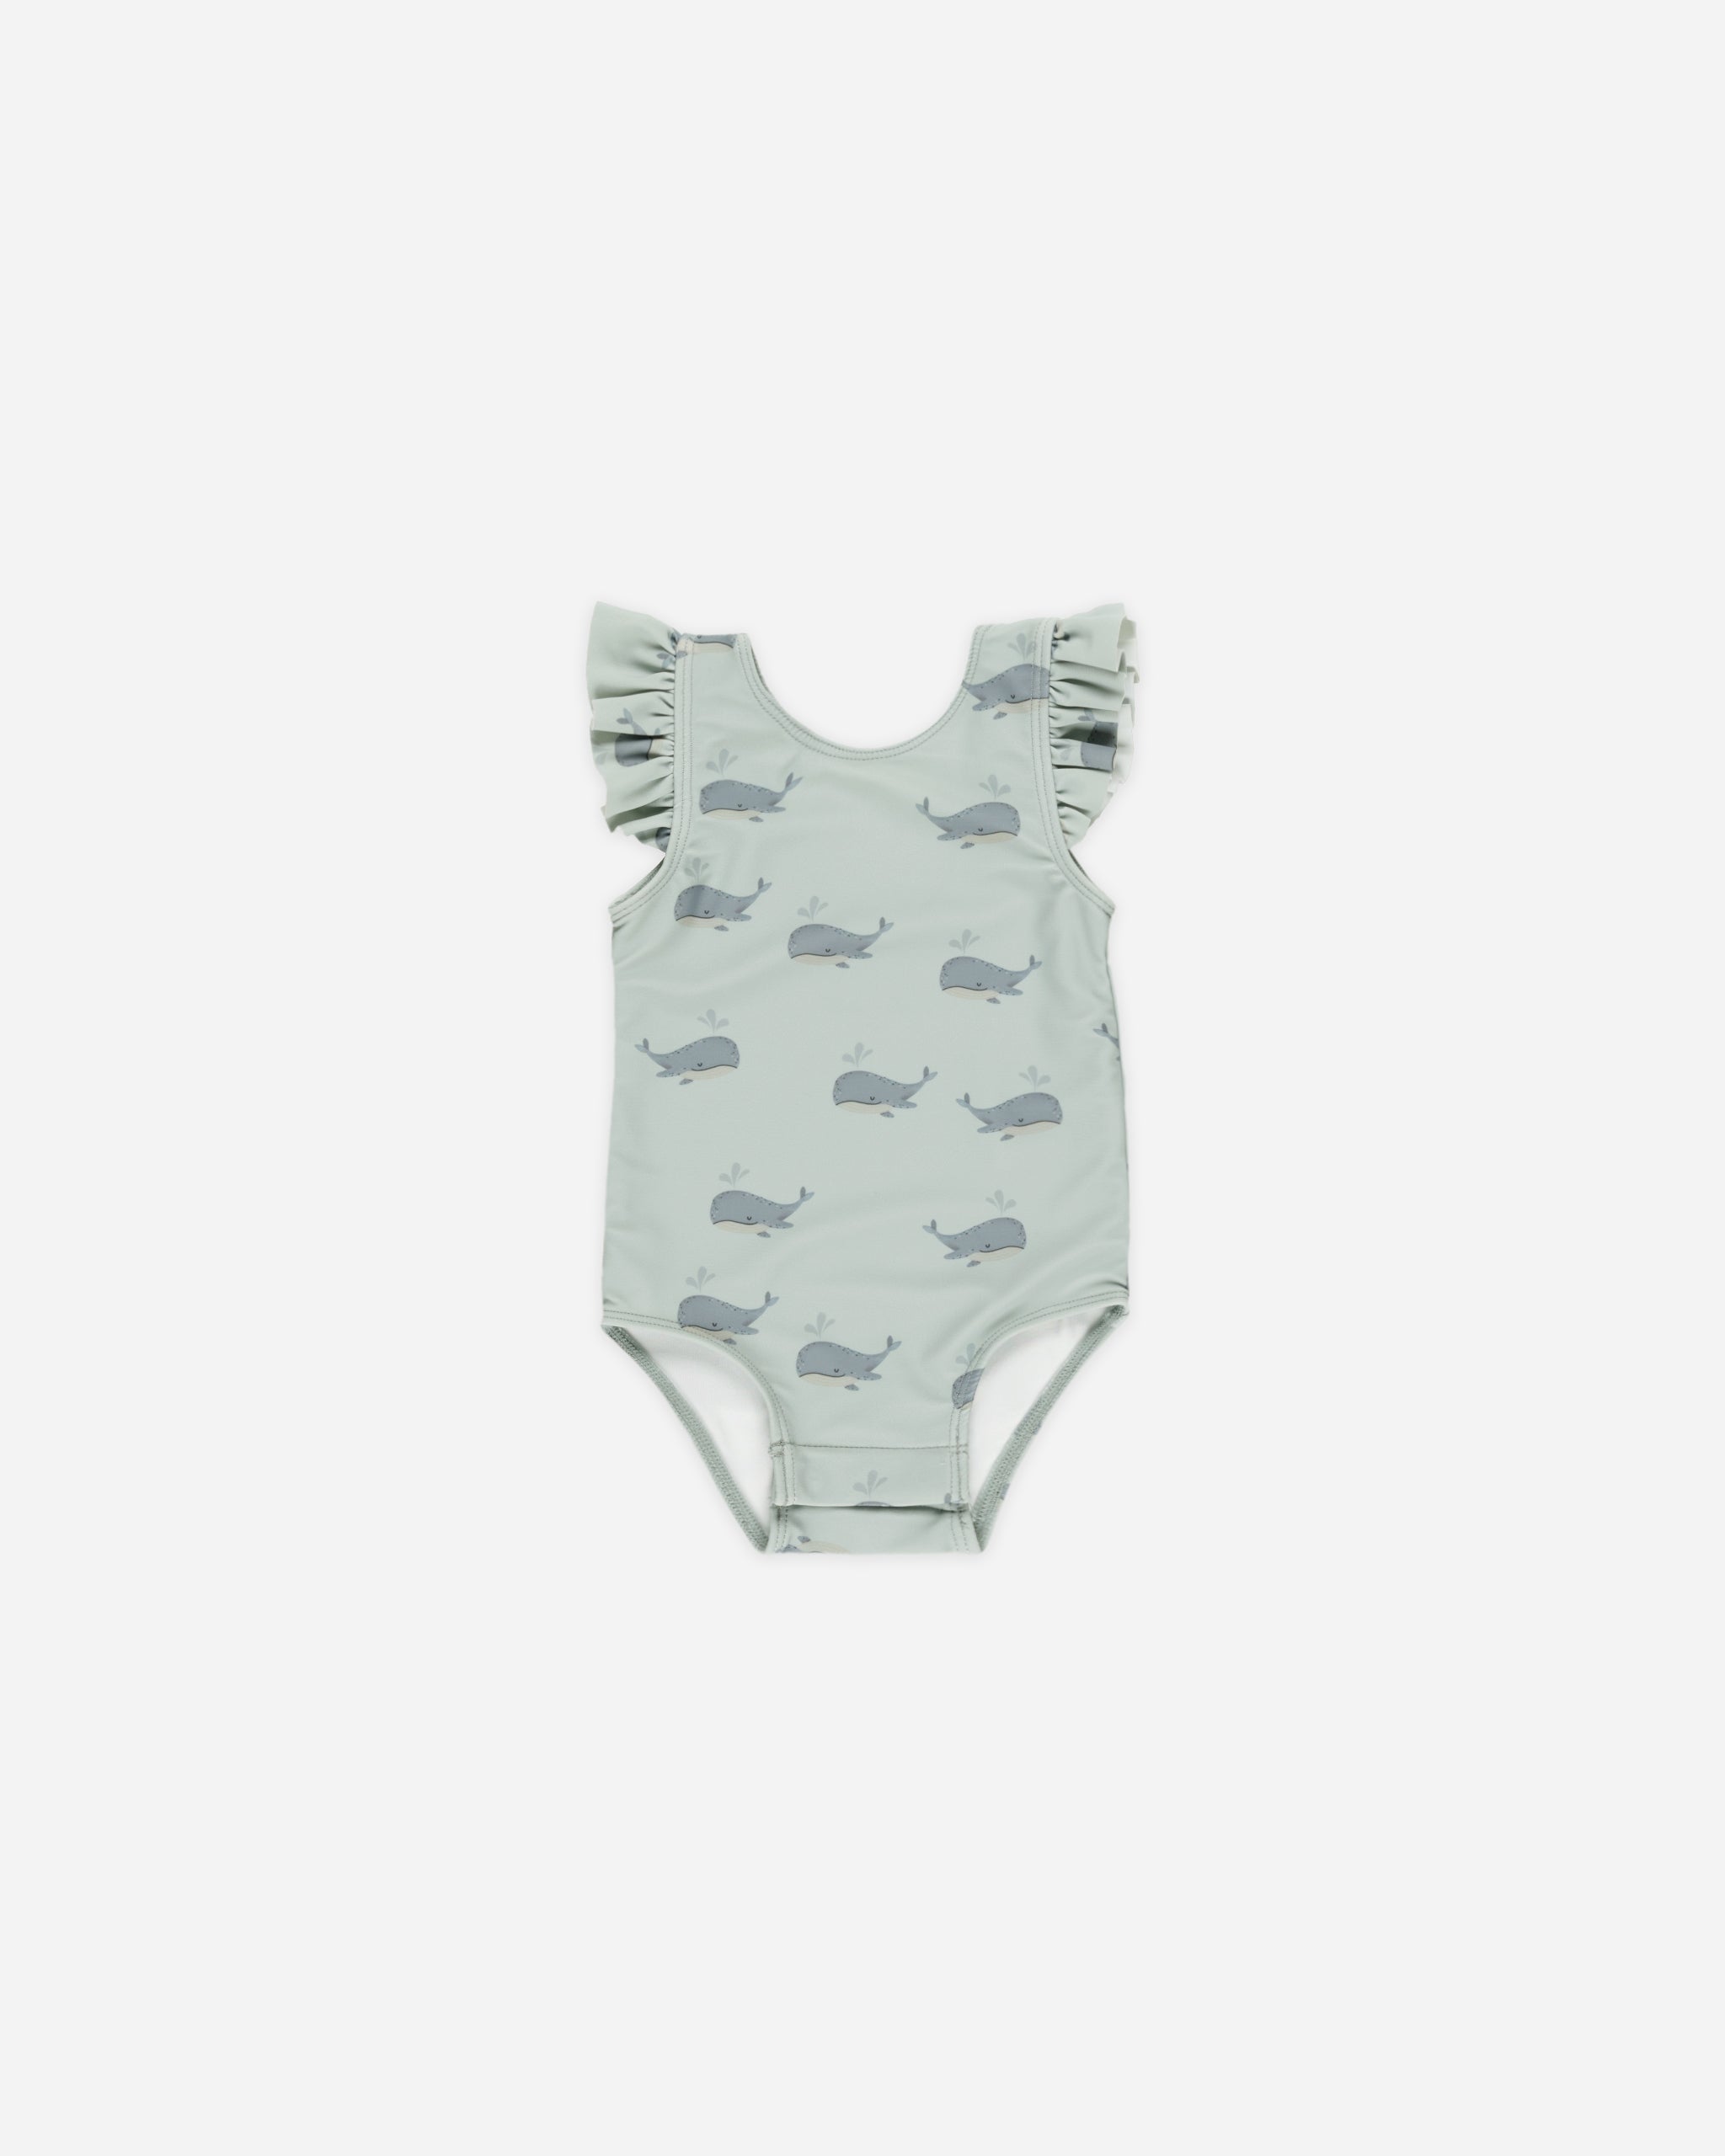 Scoop Back Onepiece || Whales - Rylee + Cru | Kids Clothes | Trendy Baby Clothes | Modern Infant Outfits |